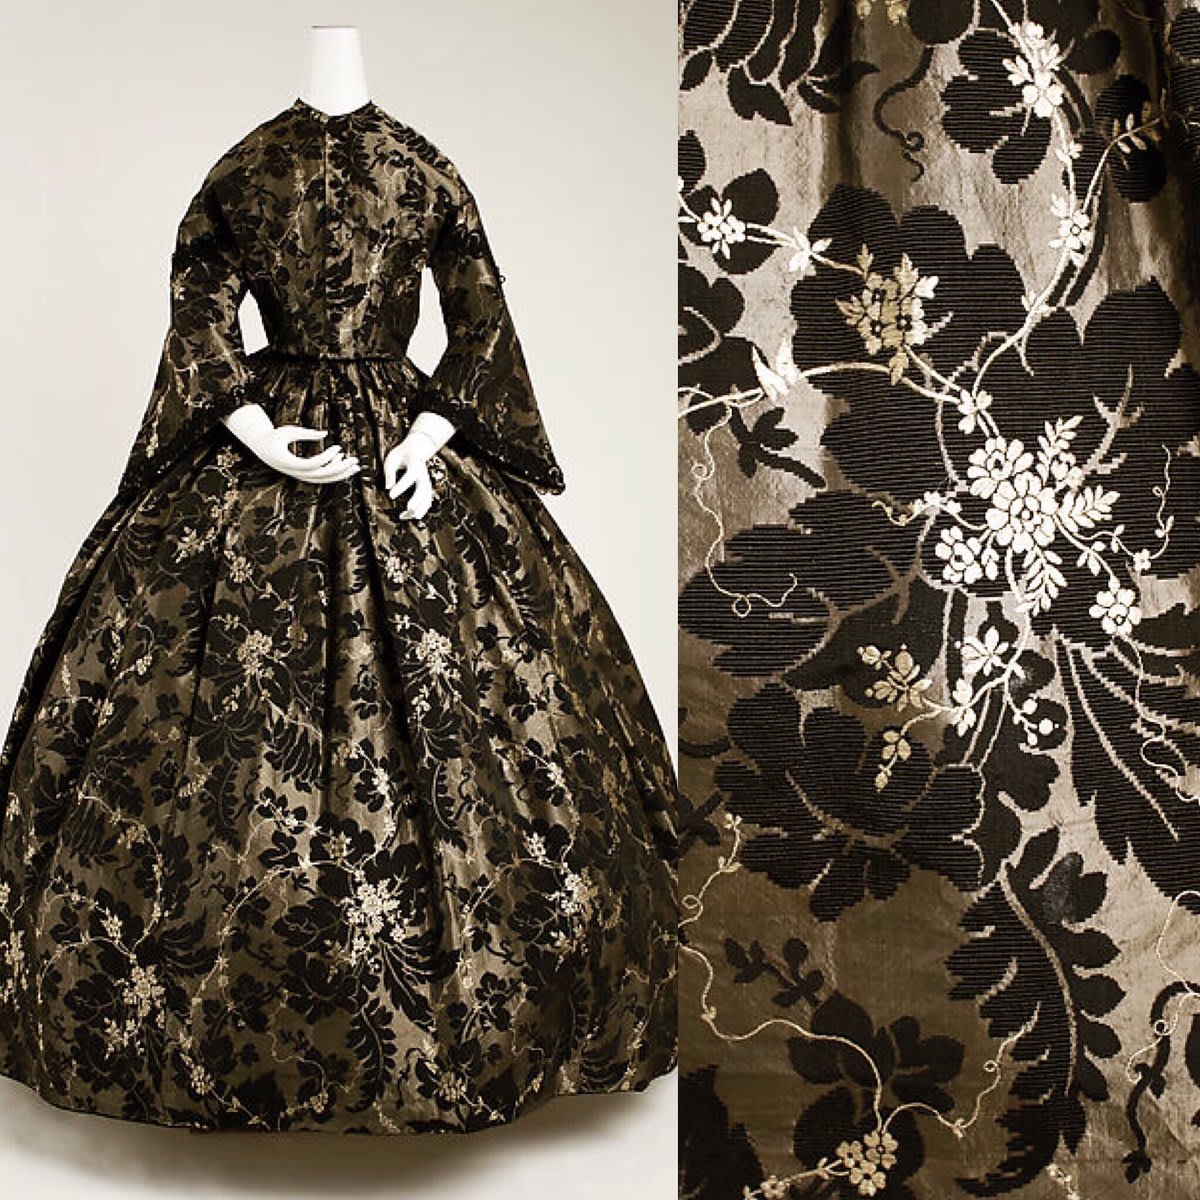 I love how the fabric is often the star in mid 19th century dresses, like this sumptuous metallic and black silk circa 1850s. Via